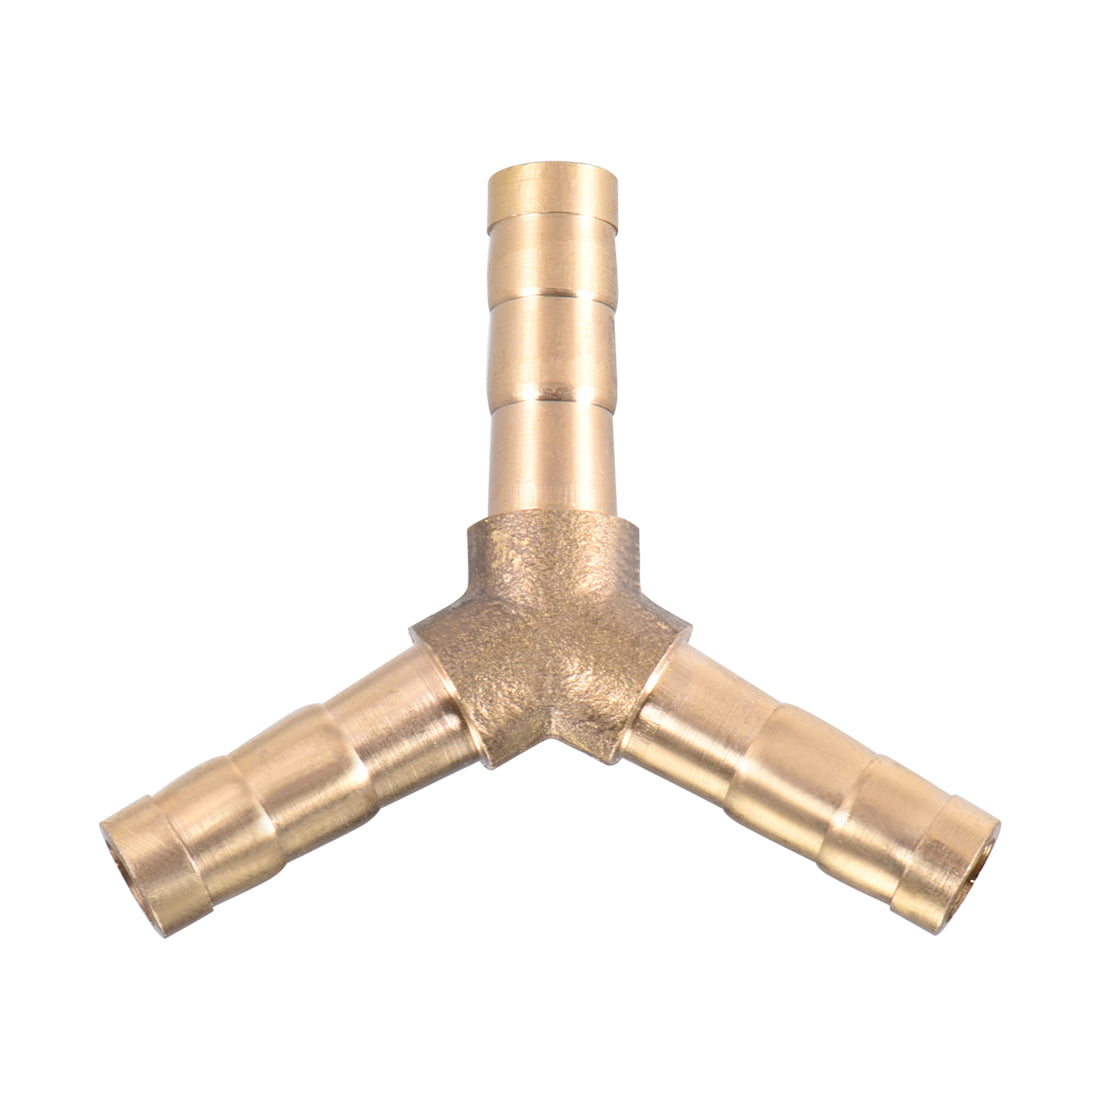 Details about   1/4 X 3/8 X 1/4 Tee 3Way Hose Barb Brass Fitting Reducer Splicer 6mm 10mm 6mm 